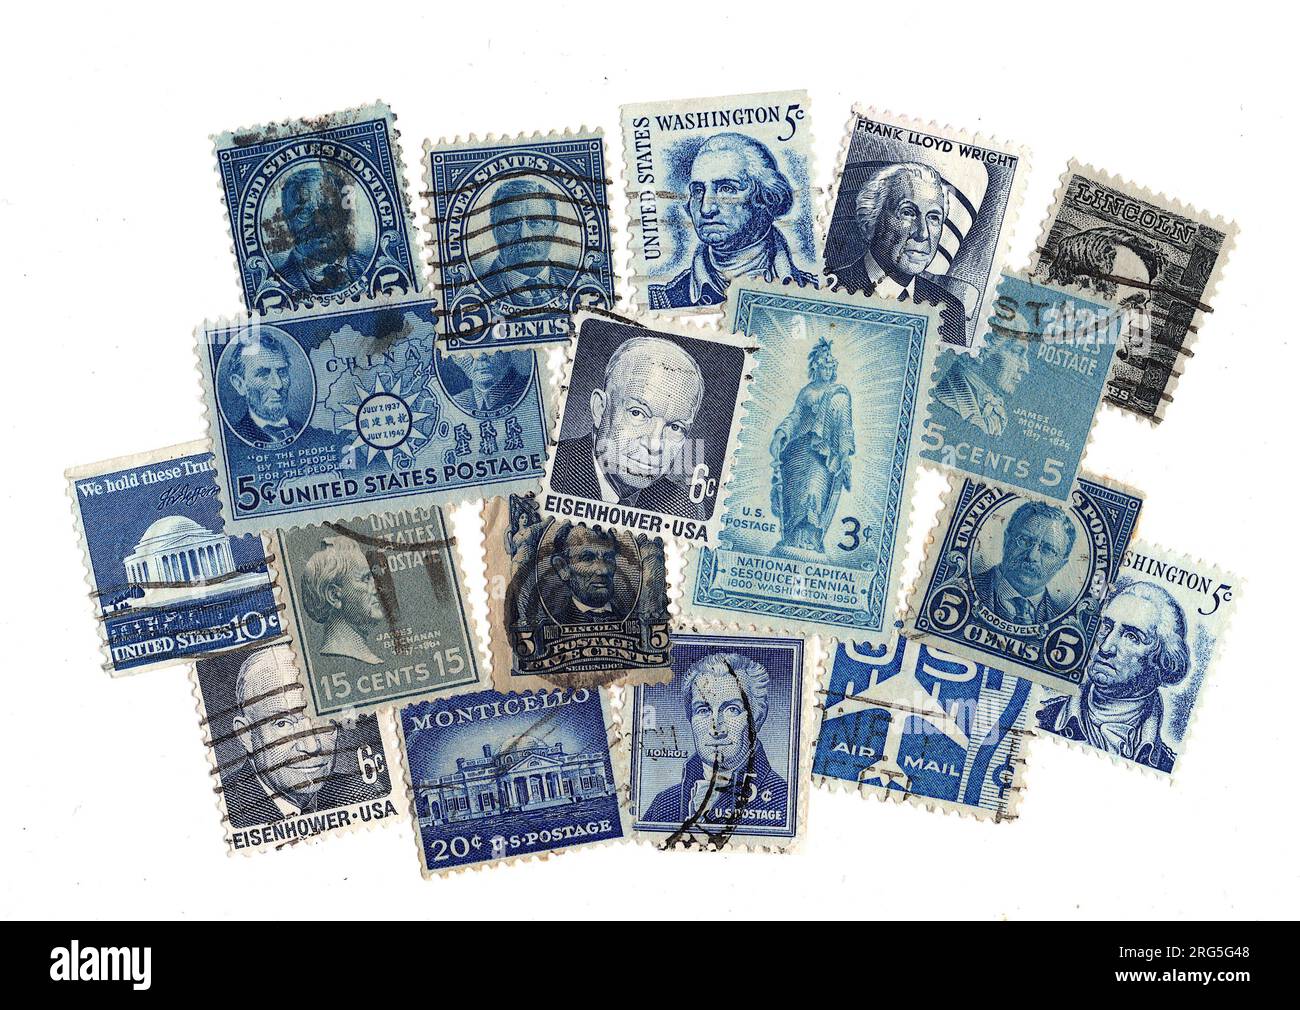 Why are people all across the country buying stamps right now?